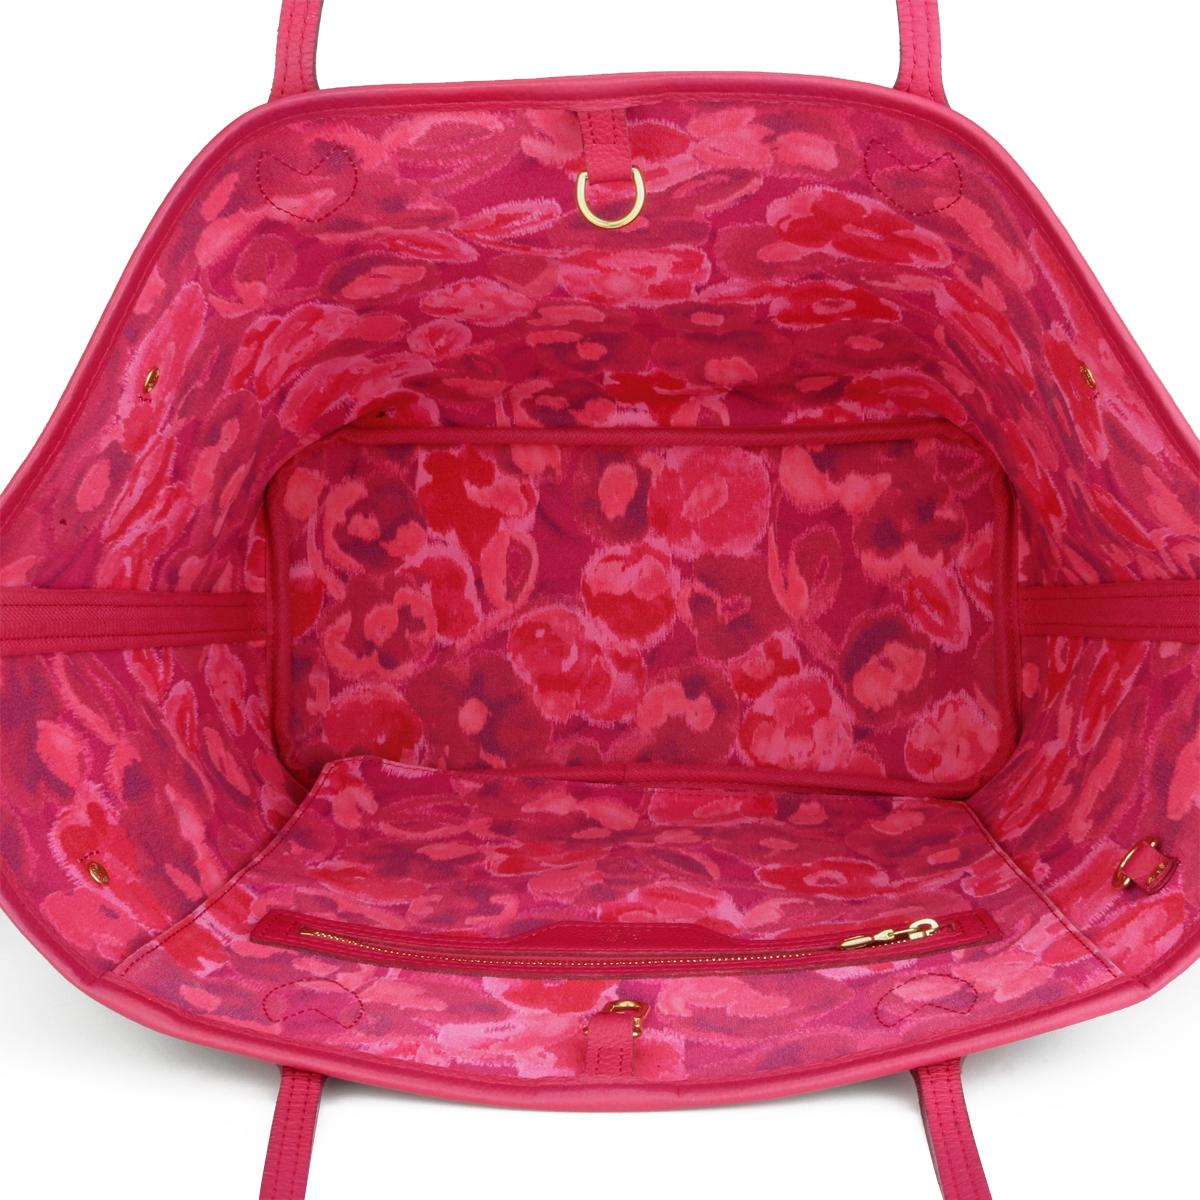 Louis Vuitton Neverfull MM Ikat Bag in Monogram Fuchsia 2013 Limited Edition For Sale 11